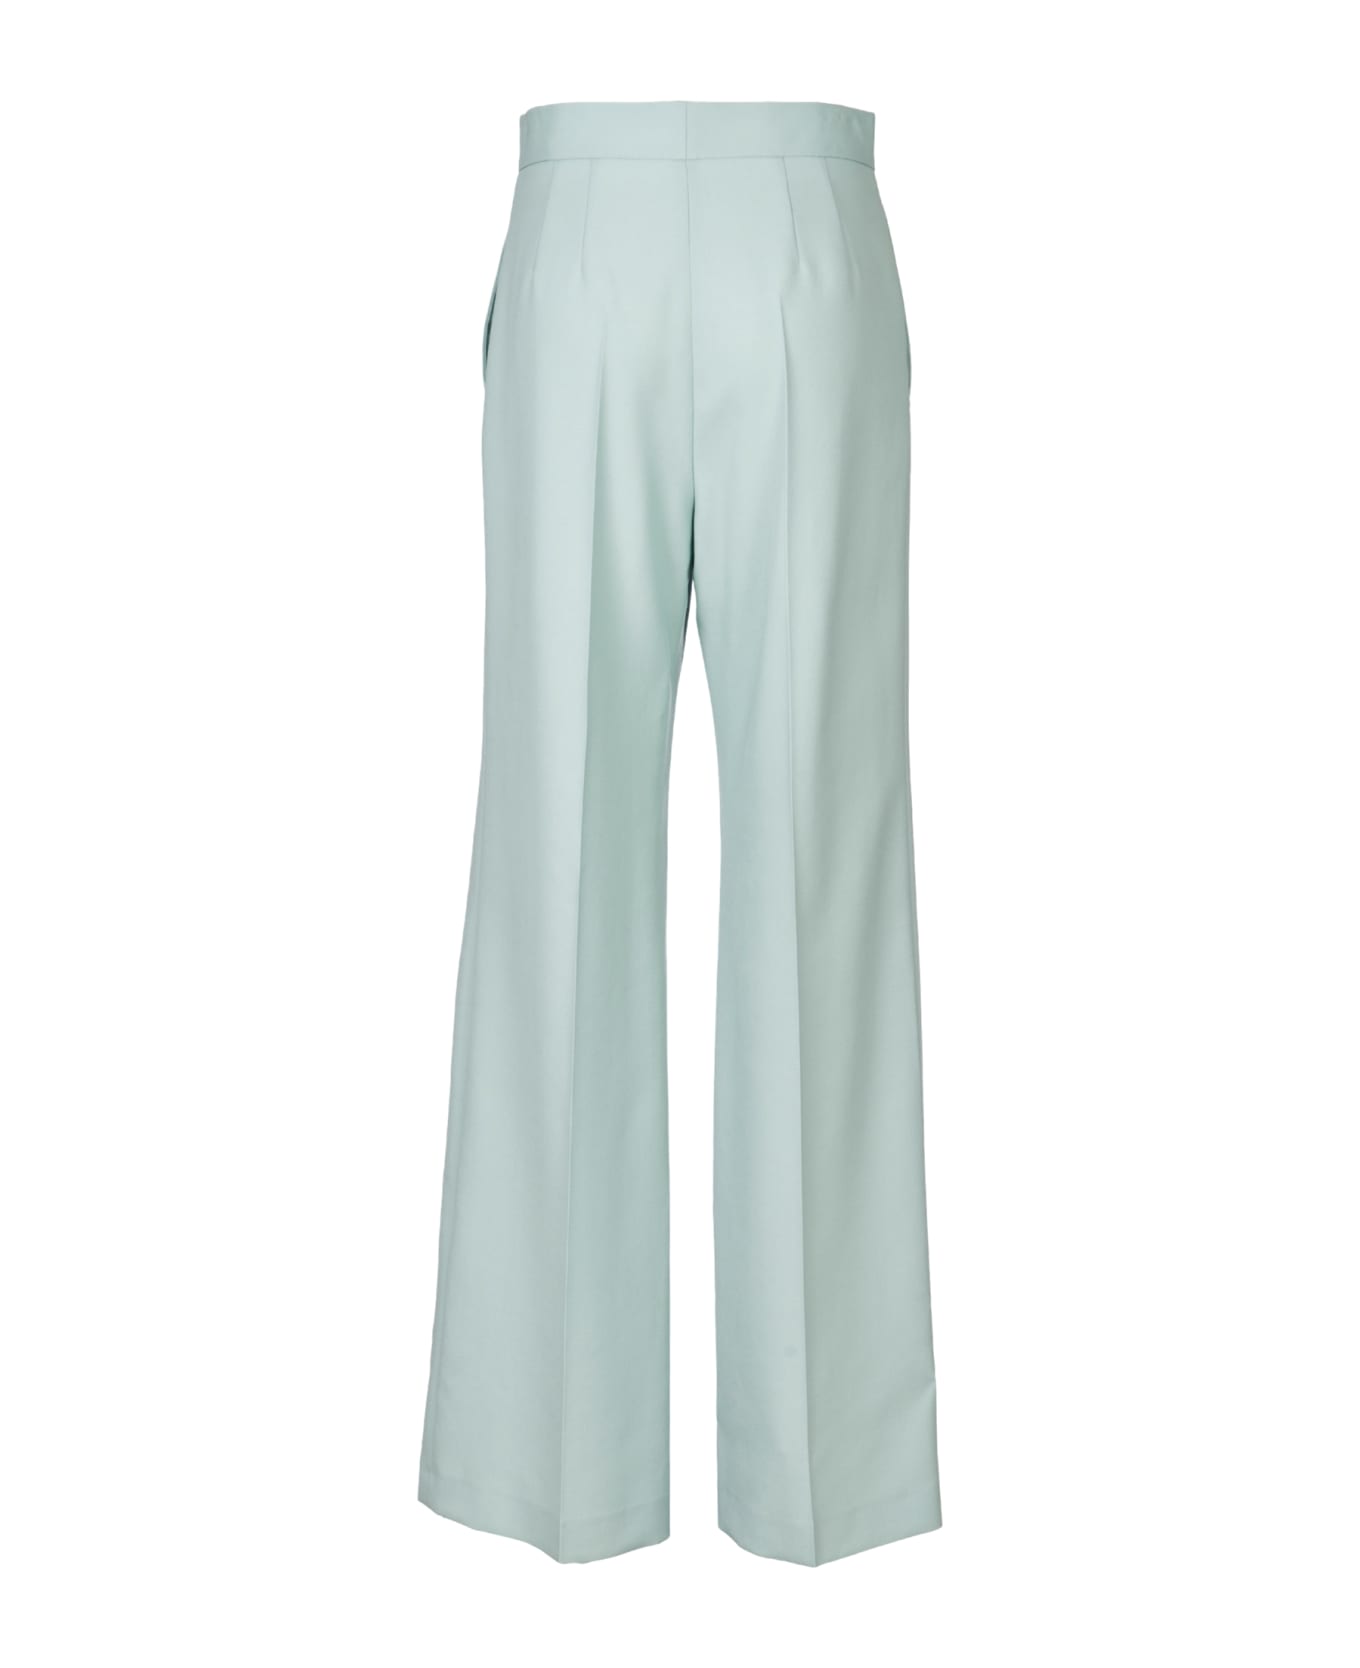 Paul Smith Trousers - Water Green